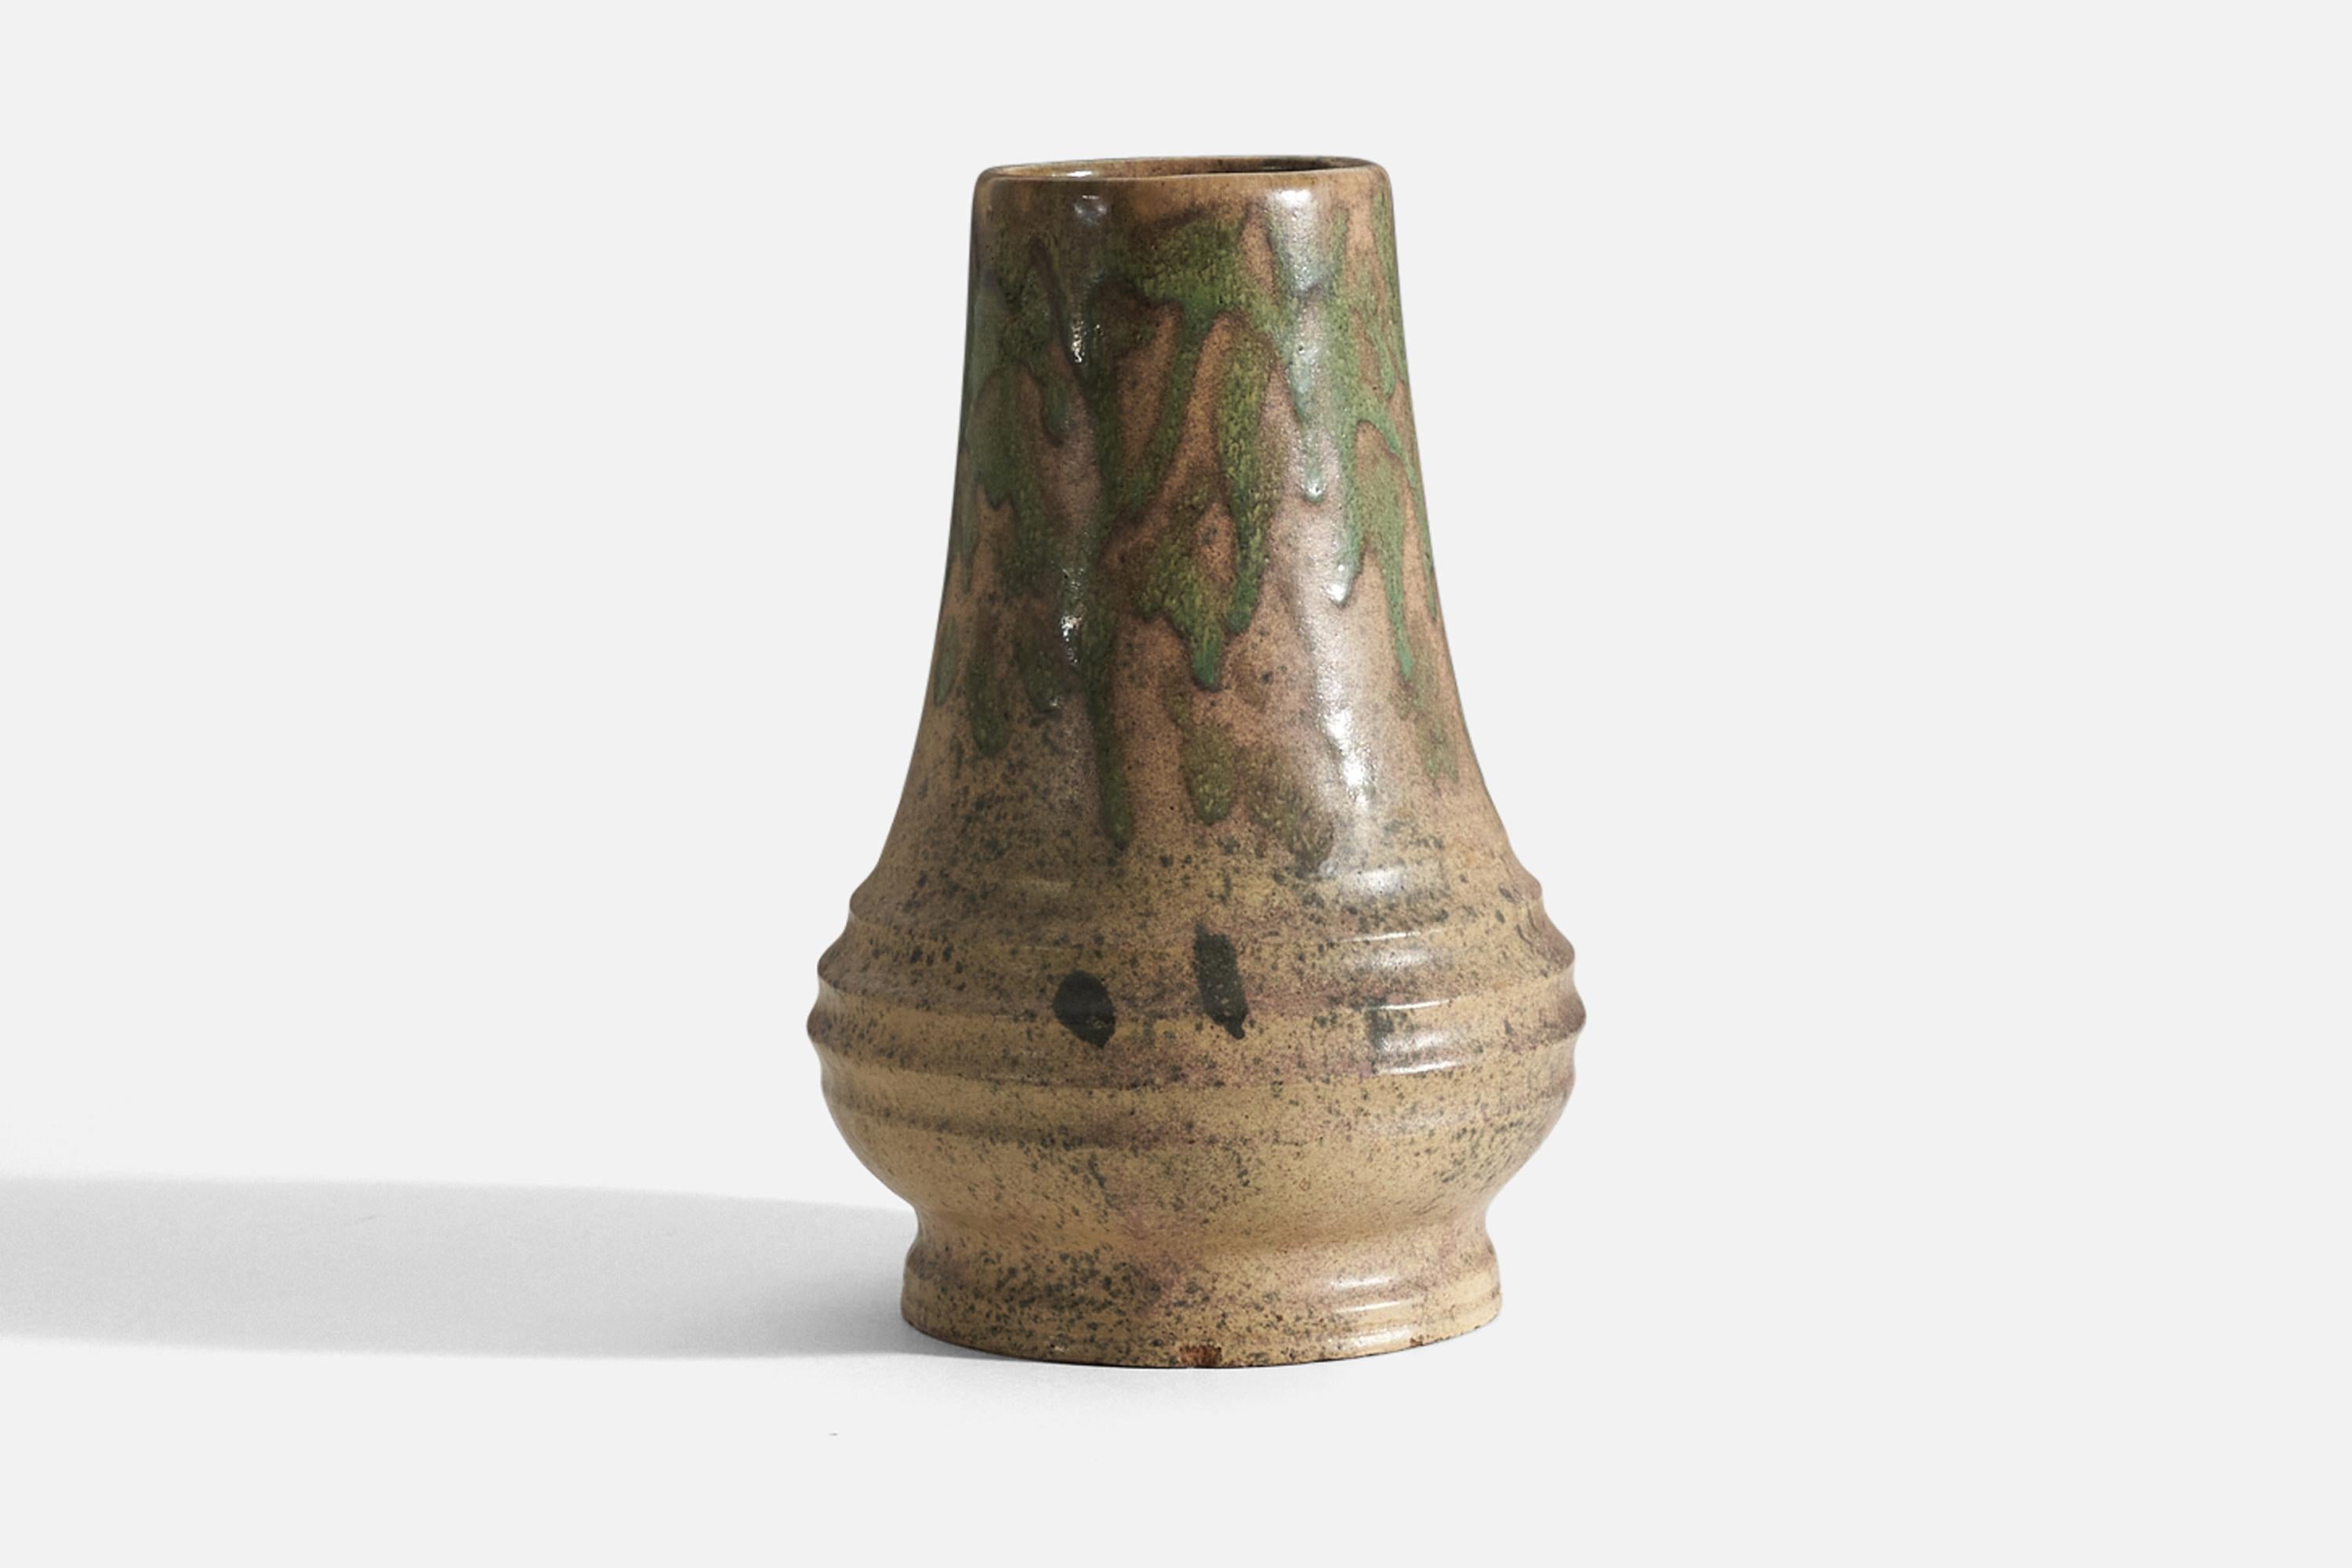 A tan, brown, and green glazed stoneware vase designed and produced by Andersson & Johansson, Höganäs, Sweden, c. 1940s.

.